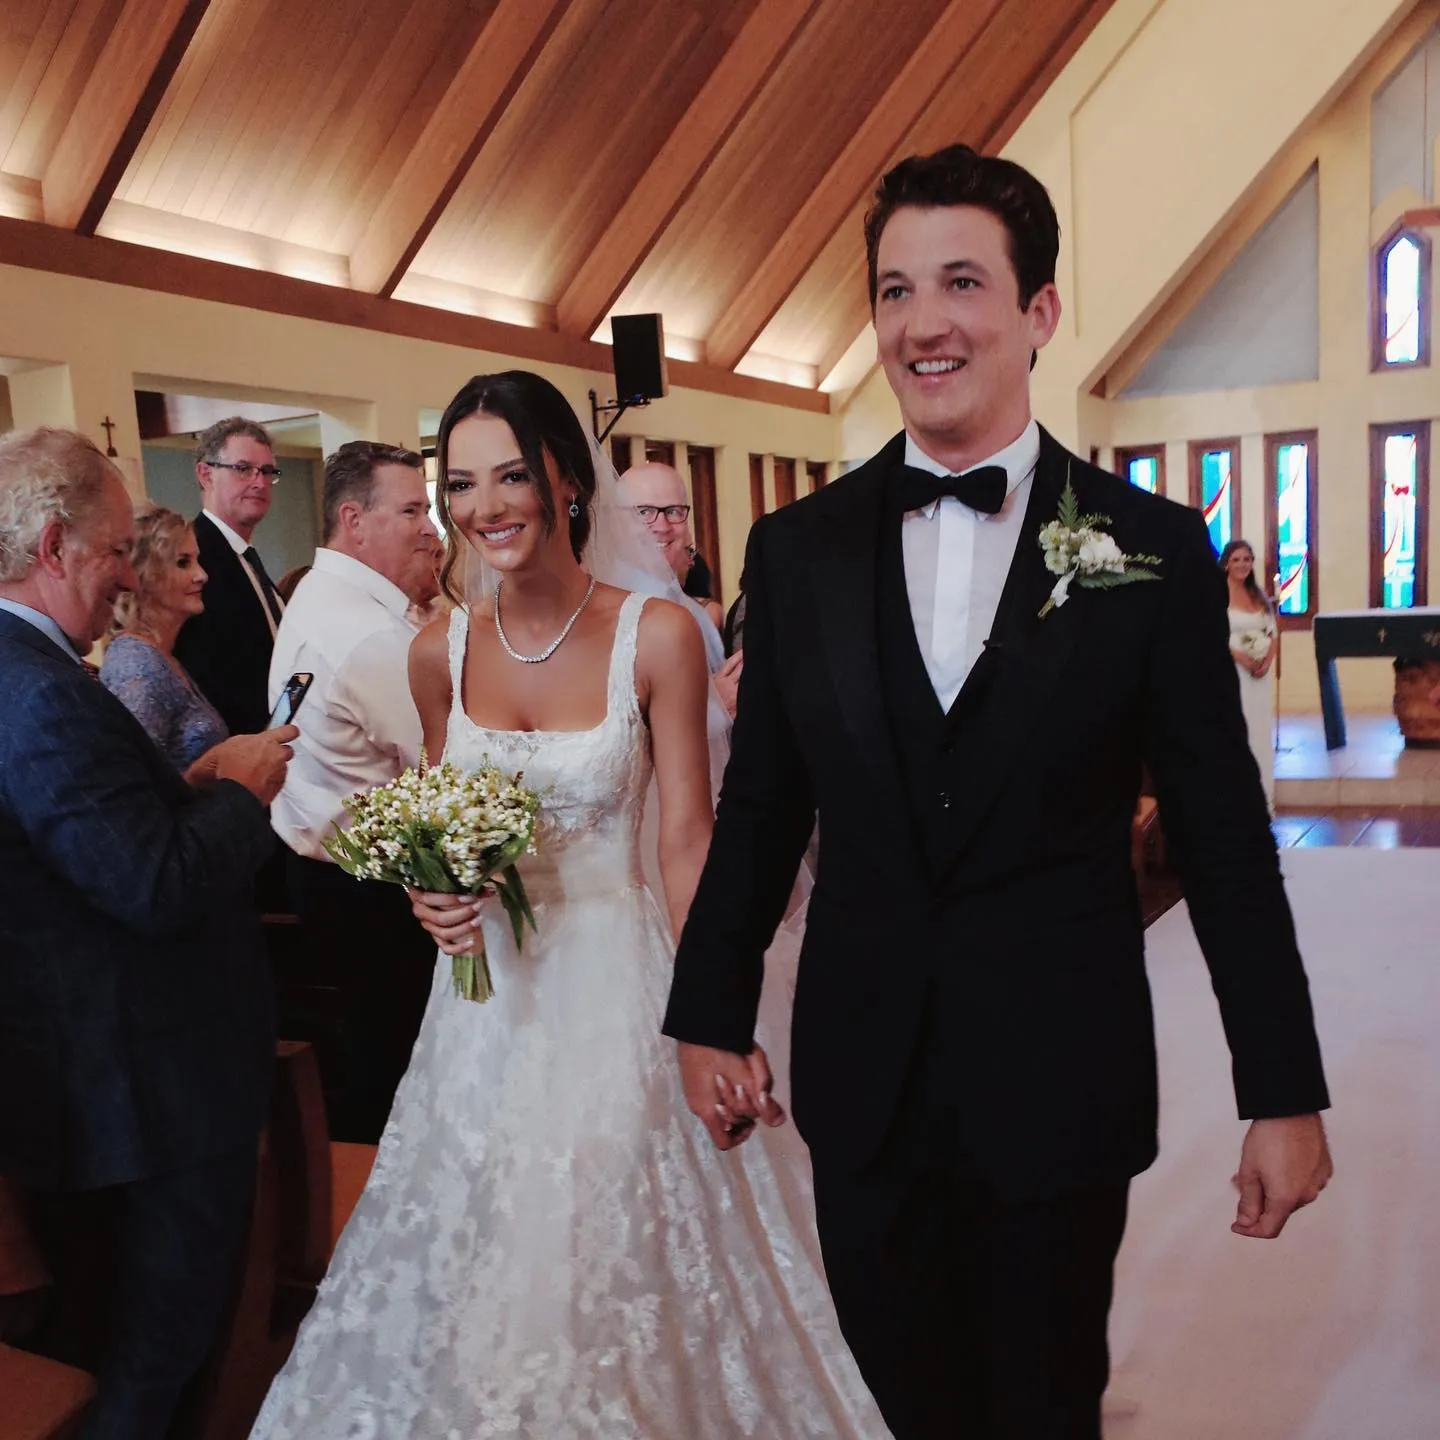 Keleigh Sperry and her husband, Miles Teller, at their wedding